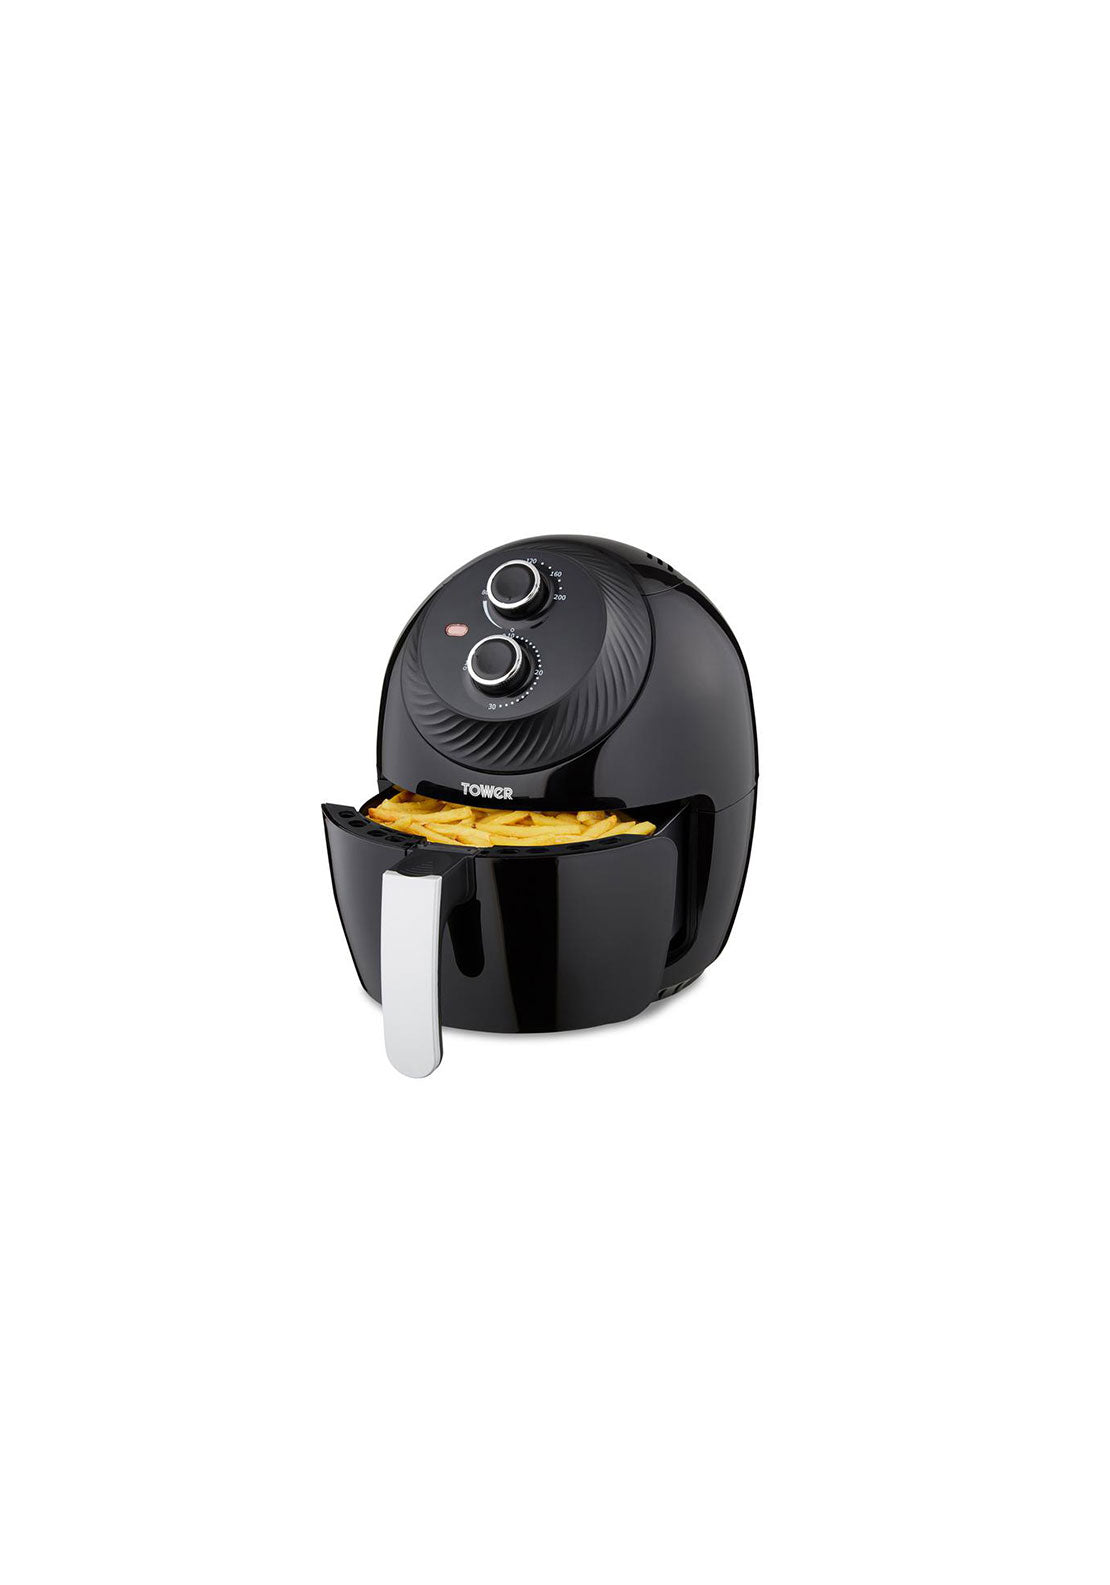 Tower Vortx 4L Manual Air Fryer | T17082 1 Shaws Department Stores